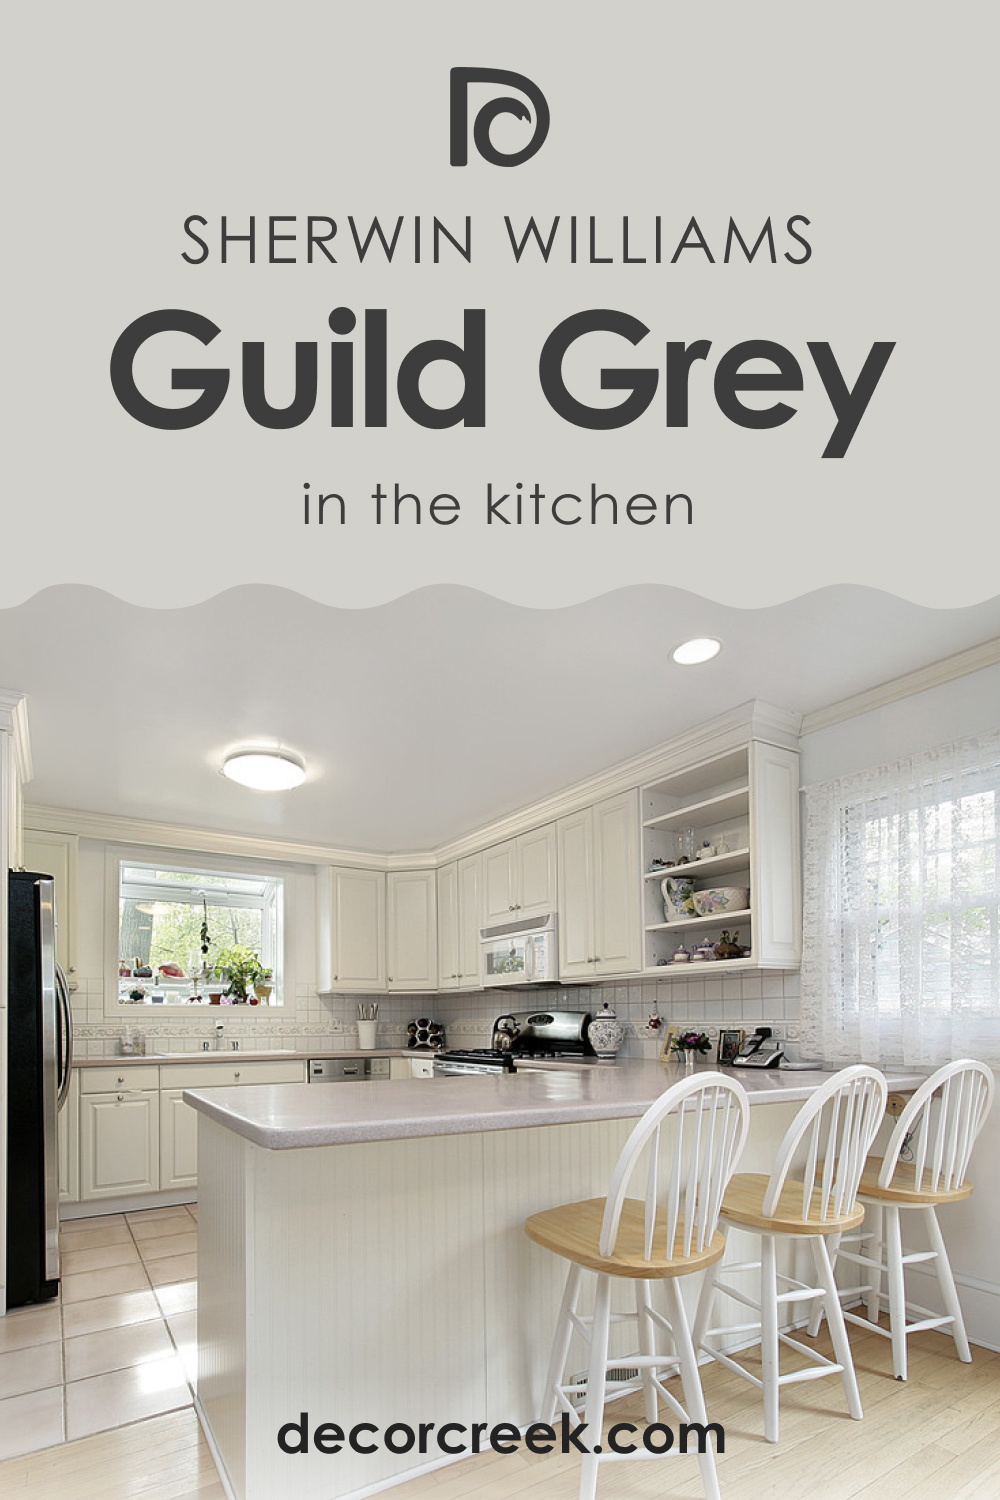 How to Use SW 9561 Guild Grey for the Kitchen?